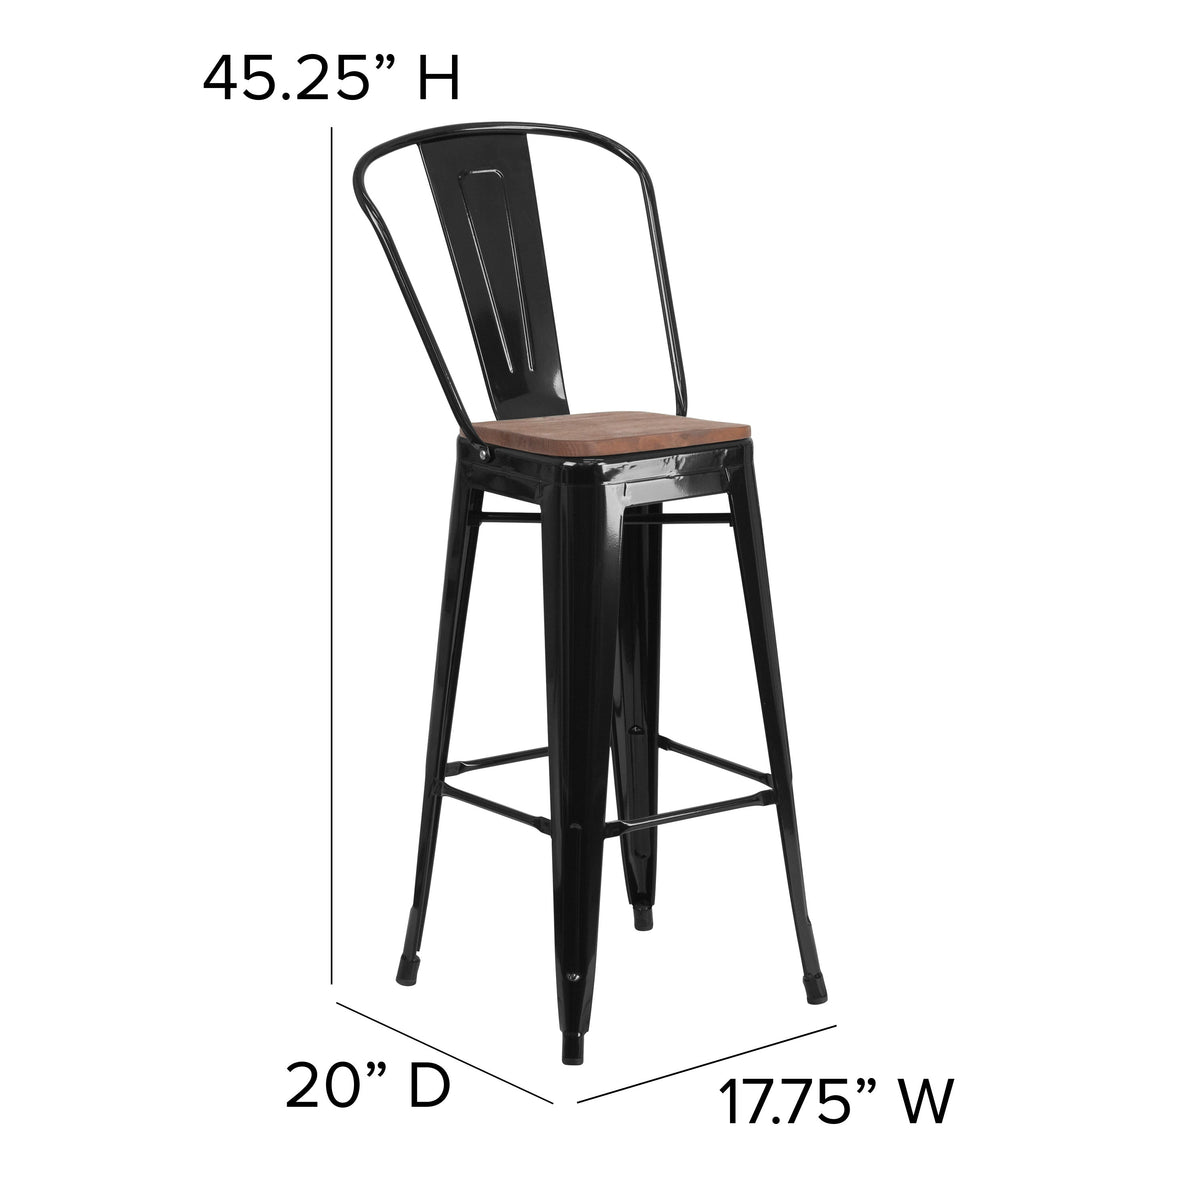 Black |#| 30inch High Black Metal Barstool with Back and Wood Seat - Kitchen Furniture